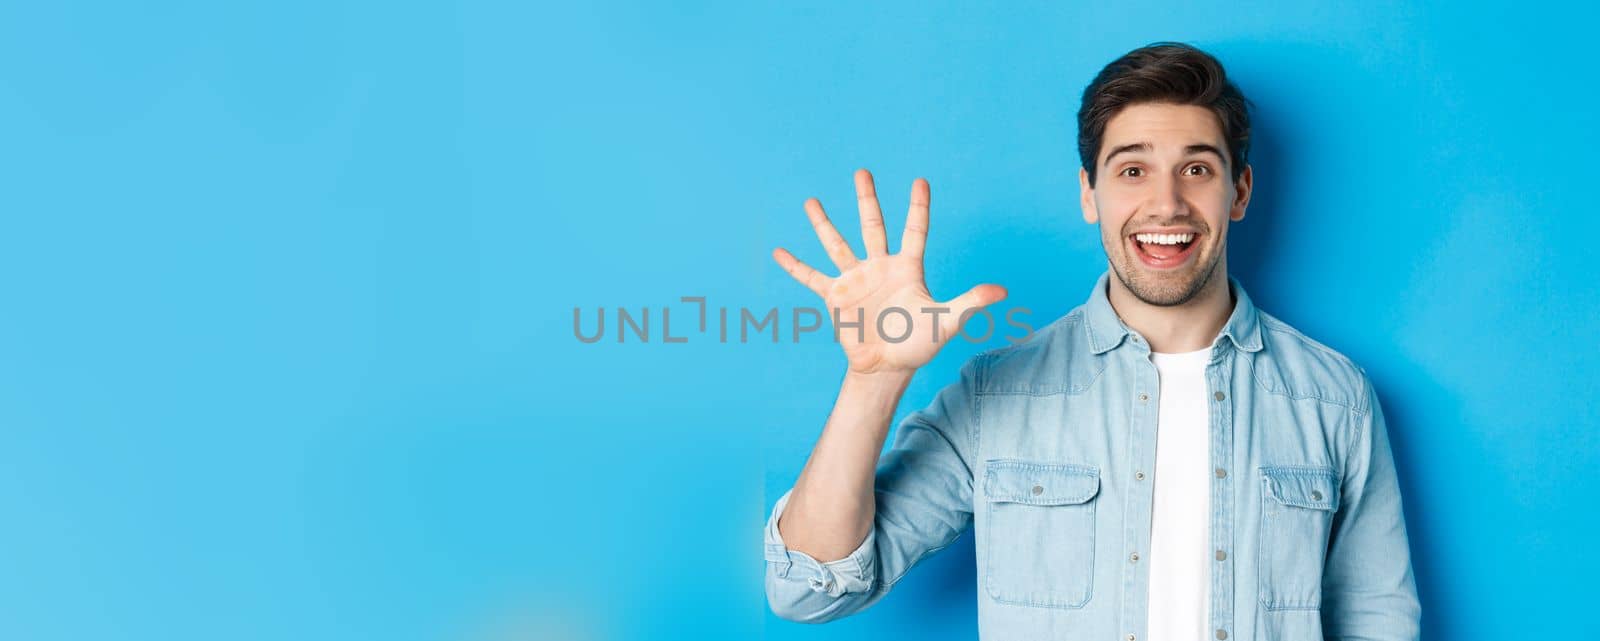 Close-up of handsome man smiling, showing fingers number five, standing over blue background.